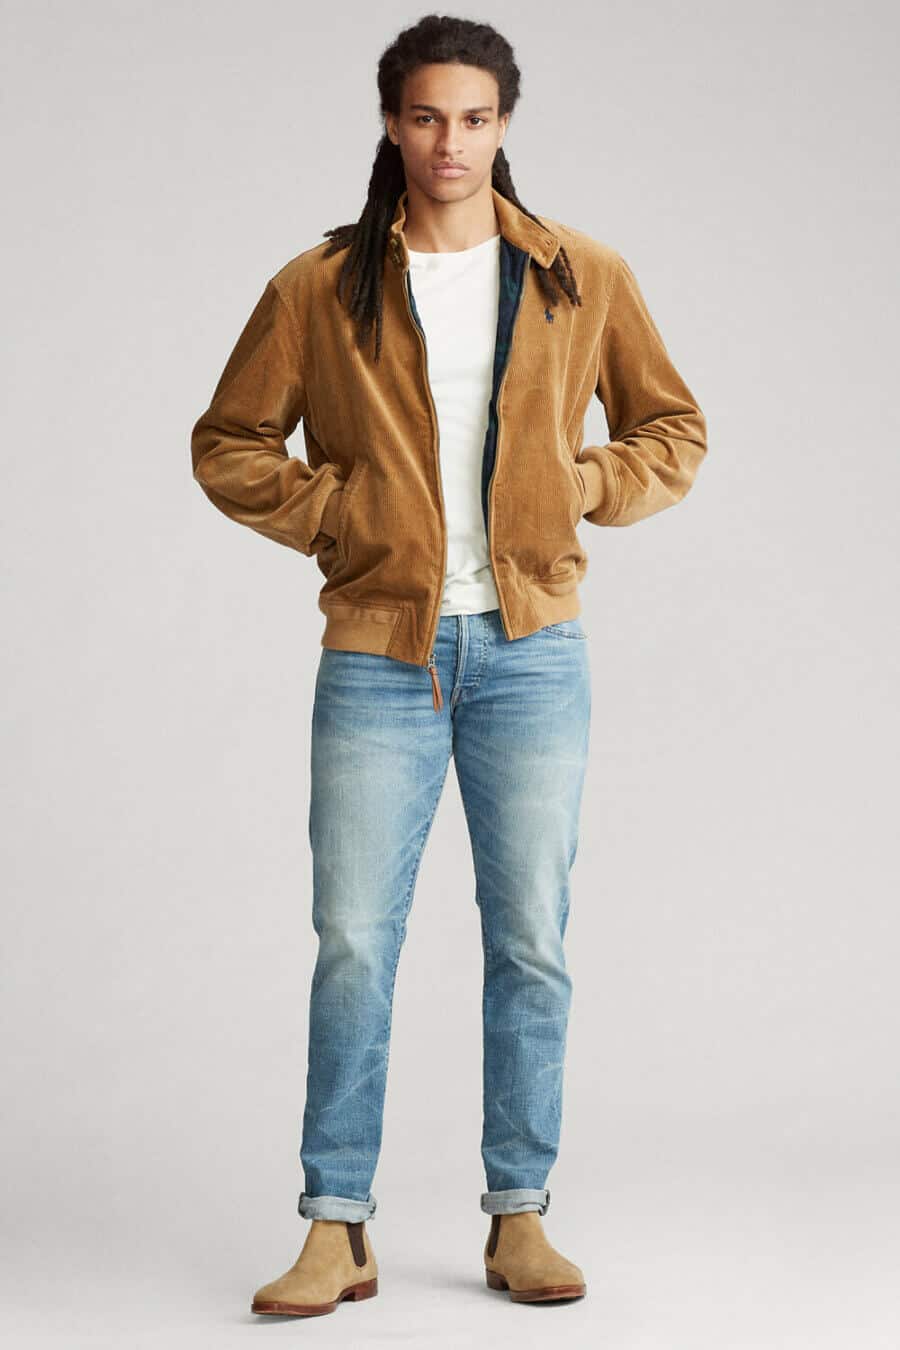 Men's light wash jeans and cord bomber jacket with suede chelsea boots outfit